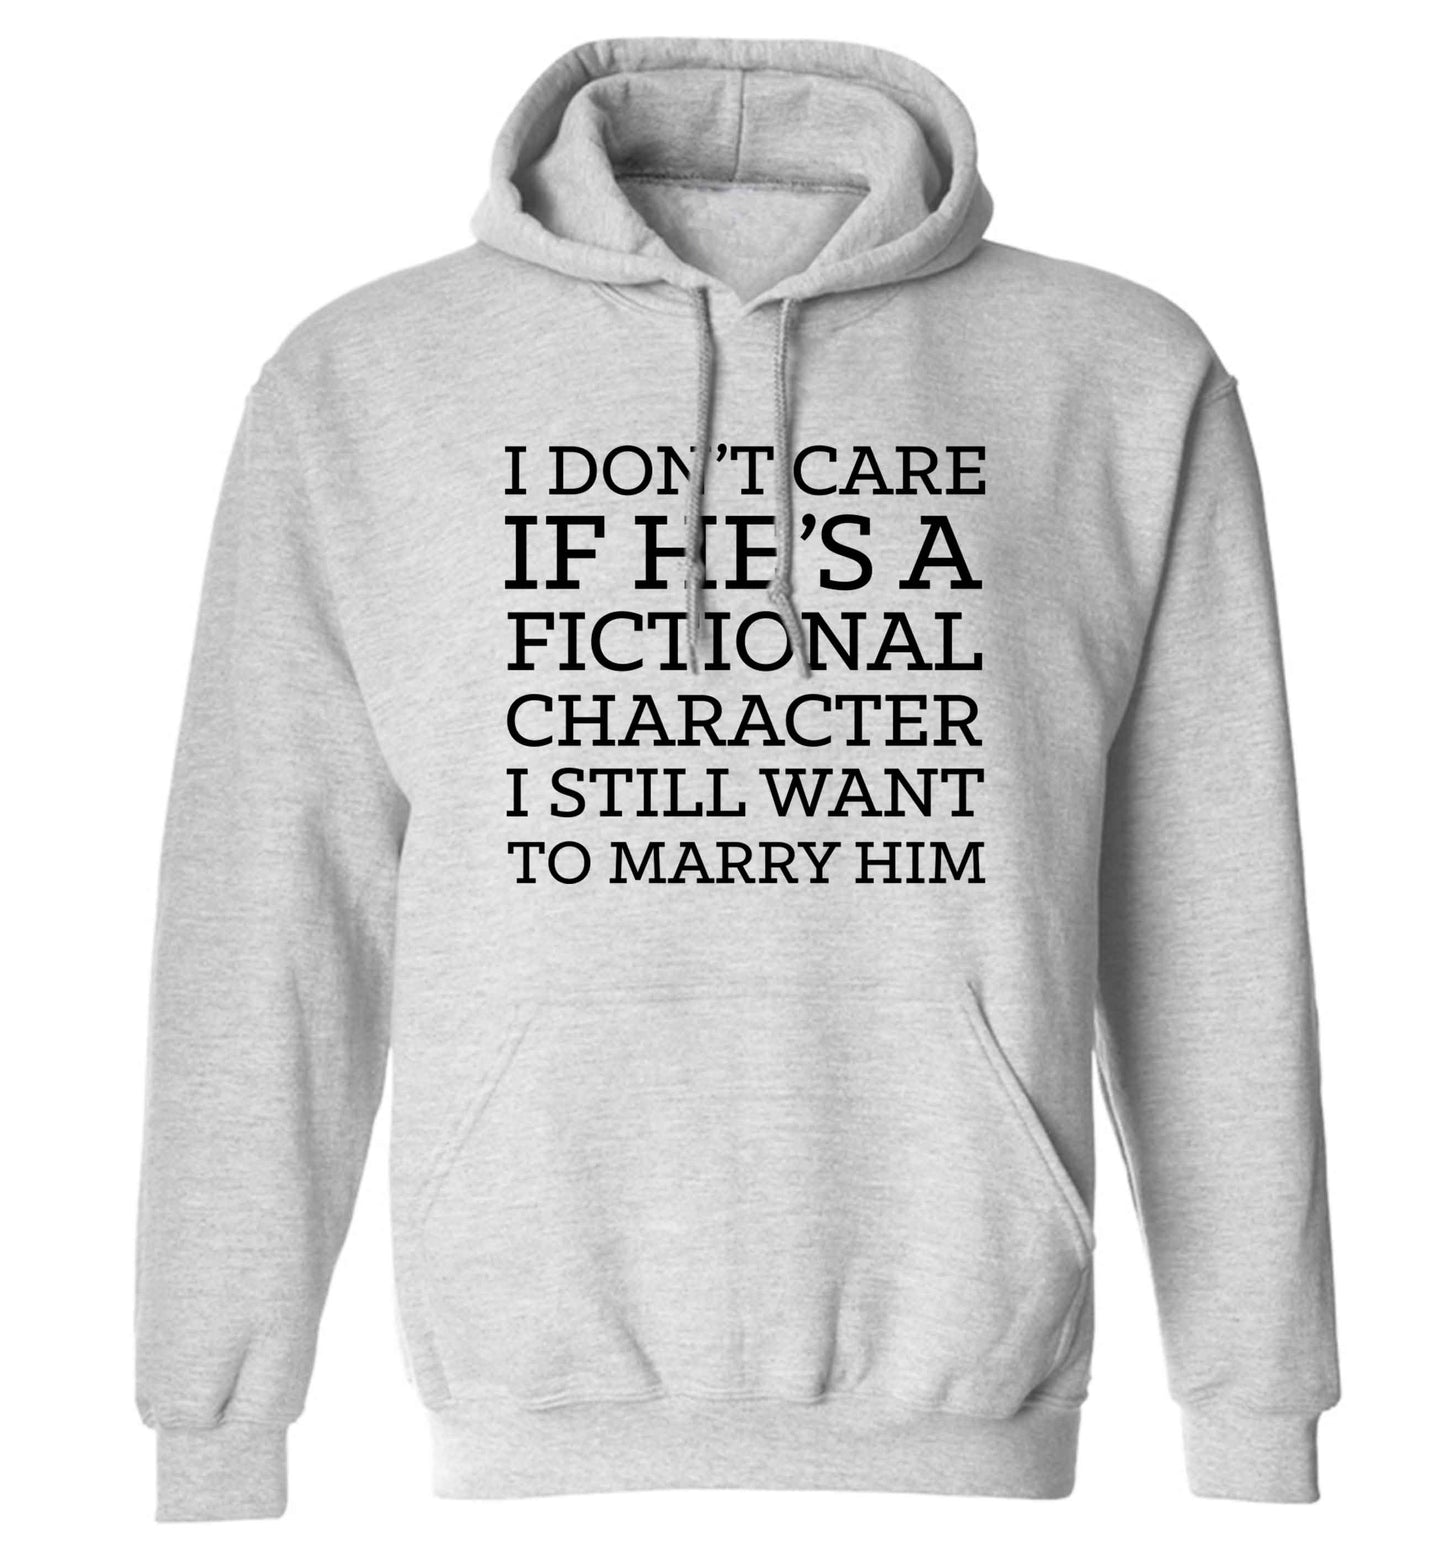 I don't care if he's a fictional character I still want to marry him adults unisex grey hoodie 2XL